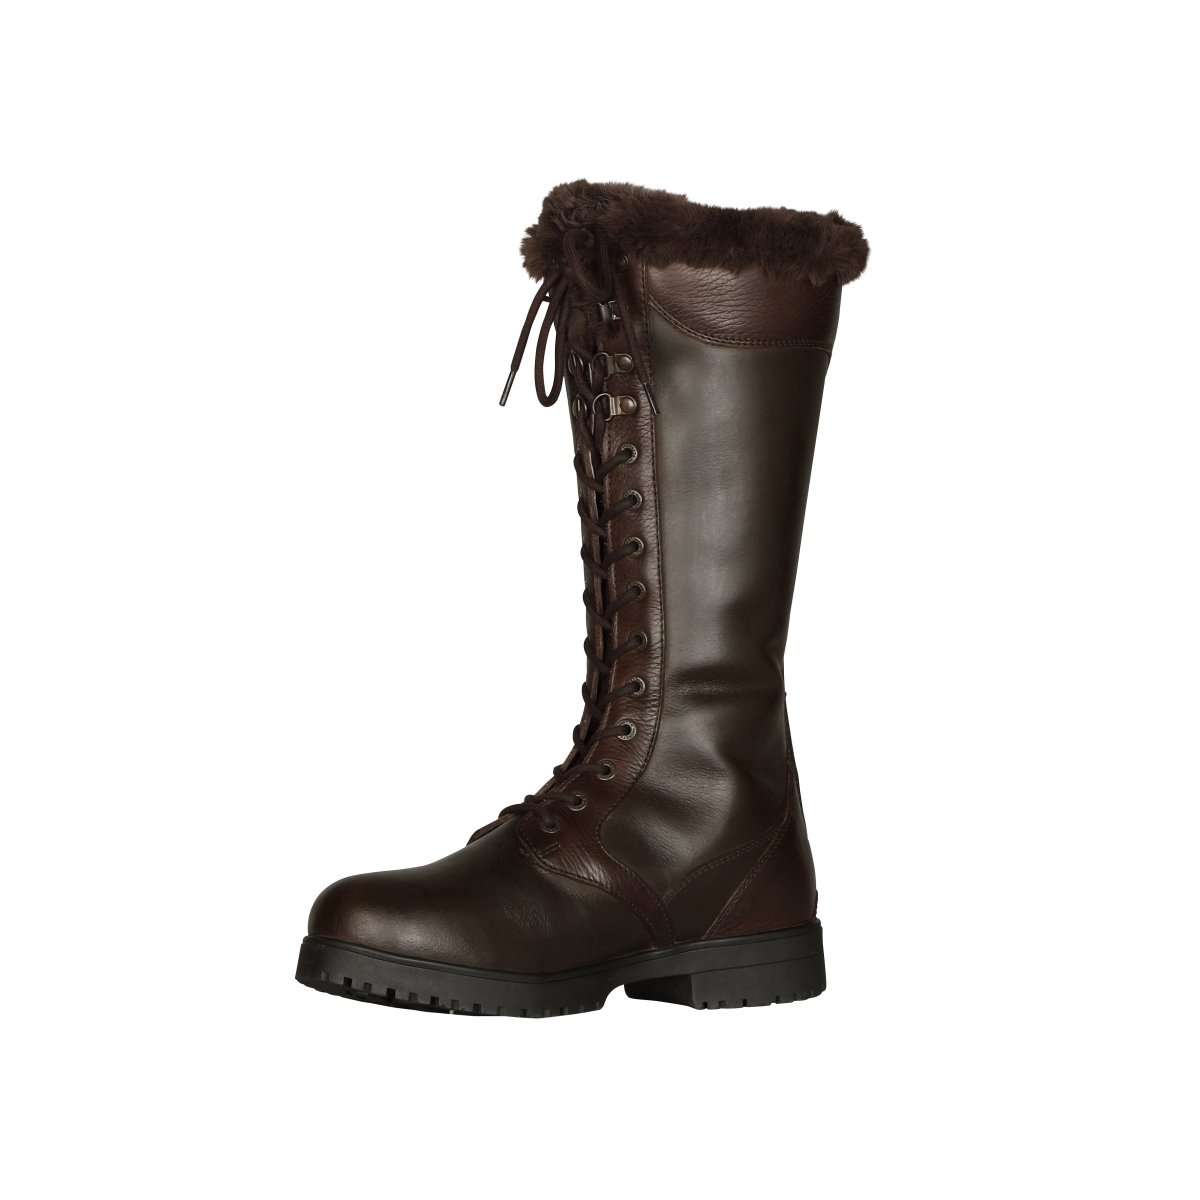 Moretta Nola Lace Country Boots - Brown - 4/37